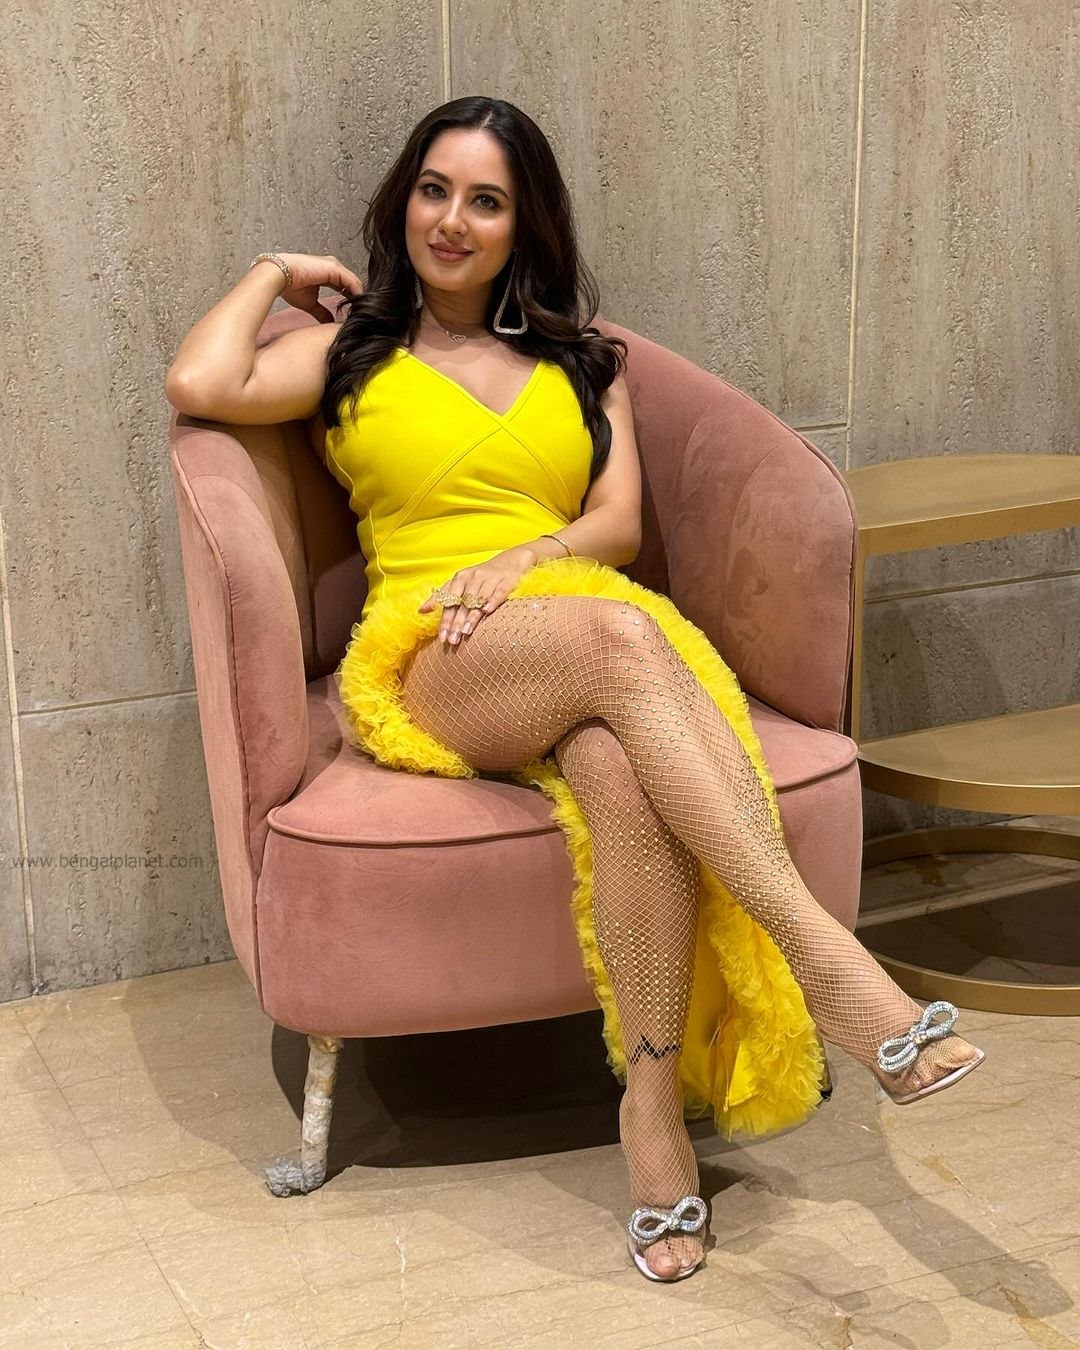 Puja-Banerjee's-hottest-look-in-a-yellow-thigh-high-slit-dress-from-Bengal's-Most-Stylish-Awards-03-Bengalplanet.com